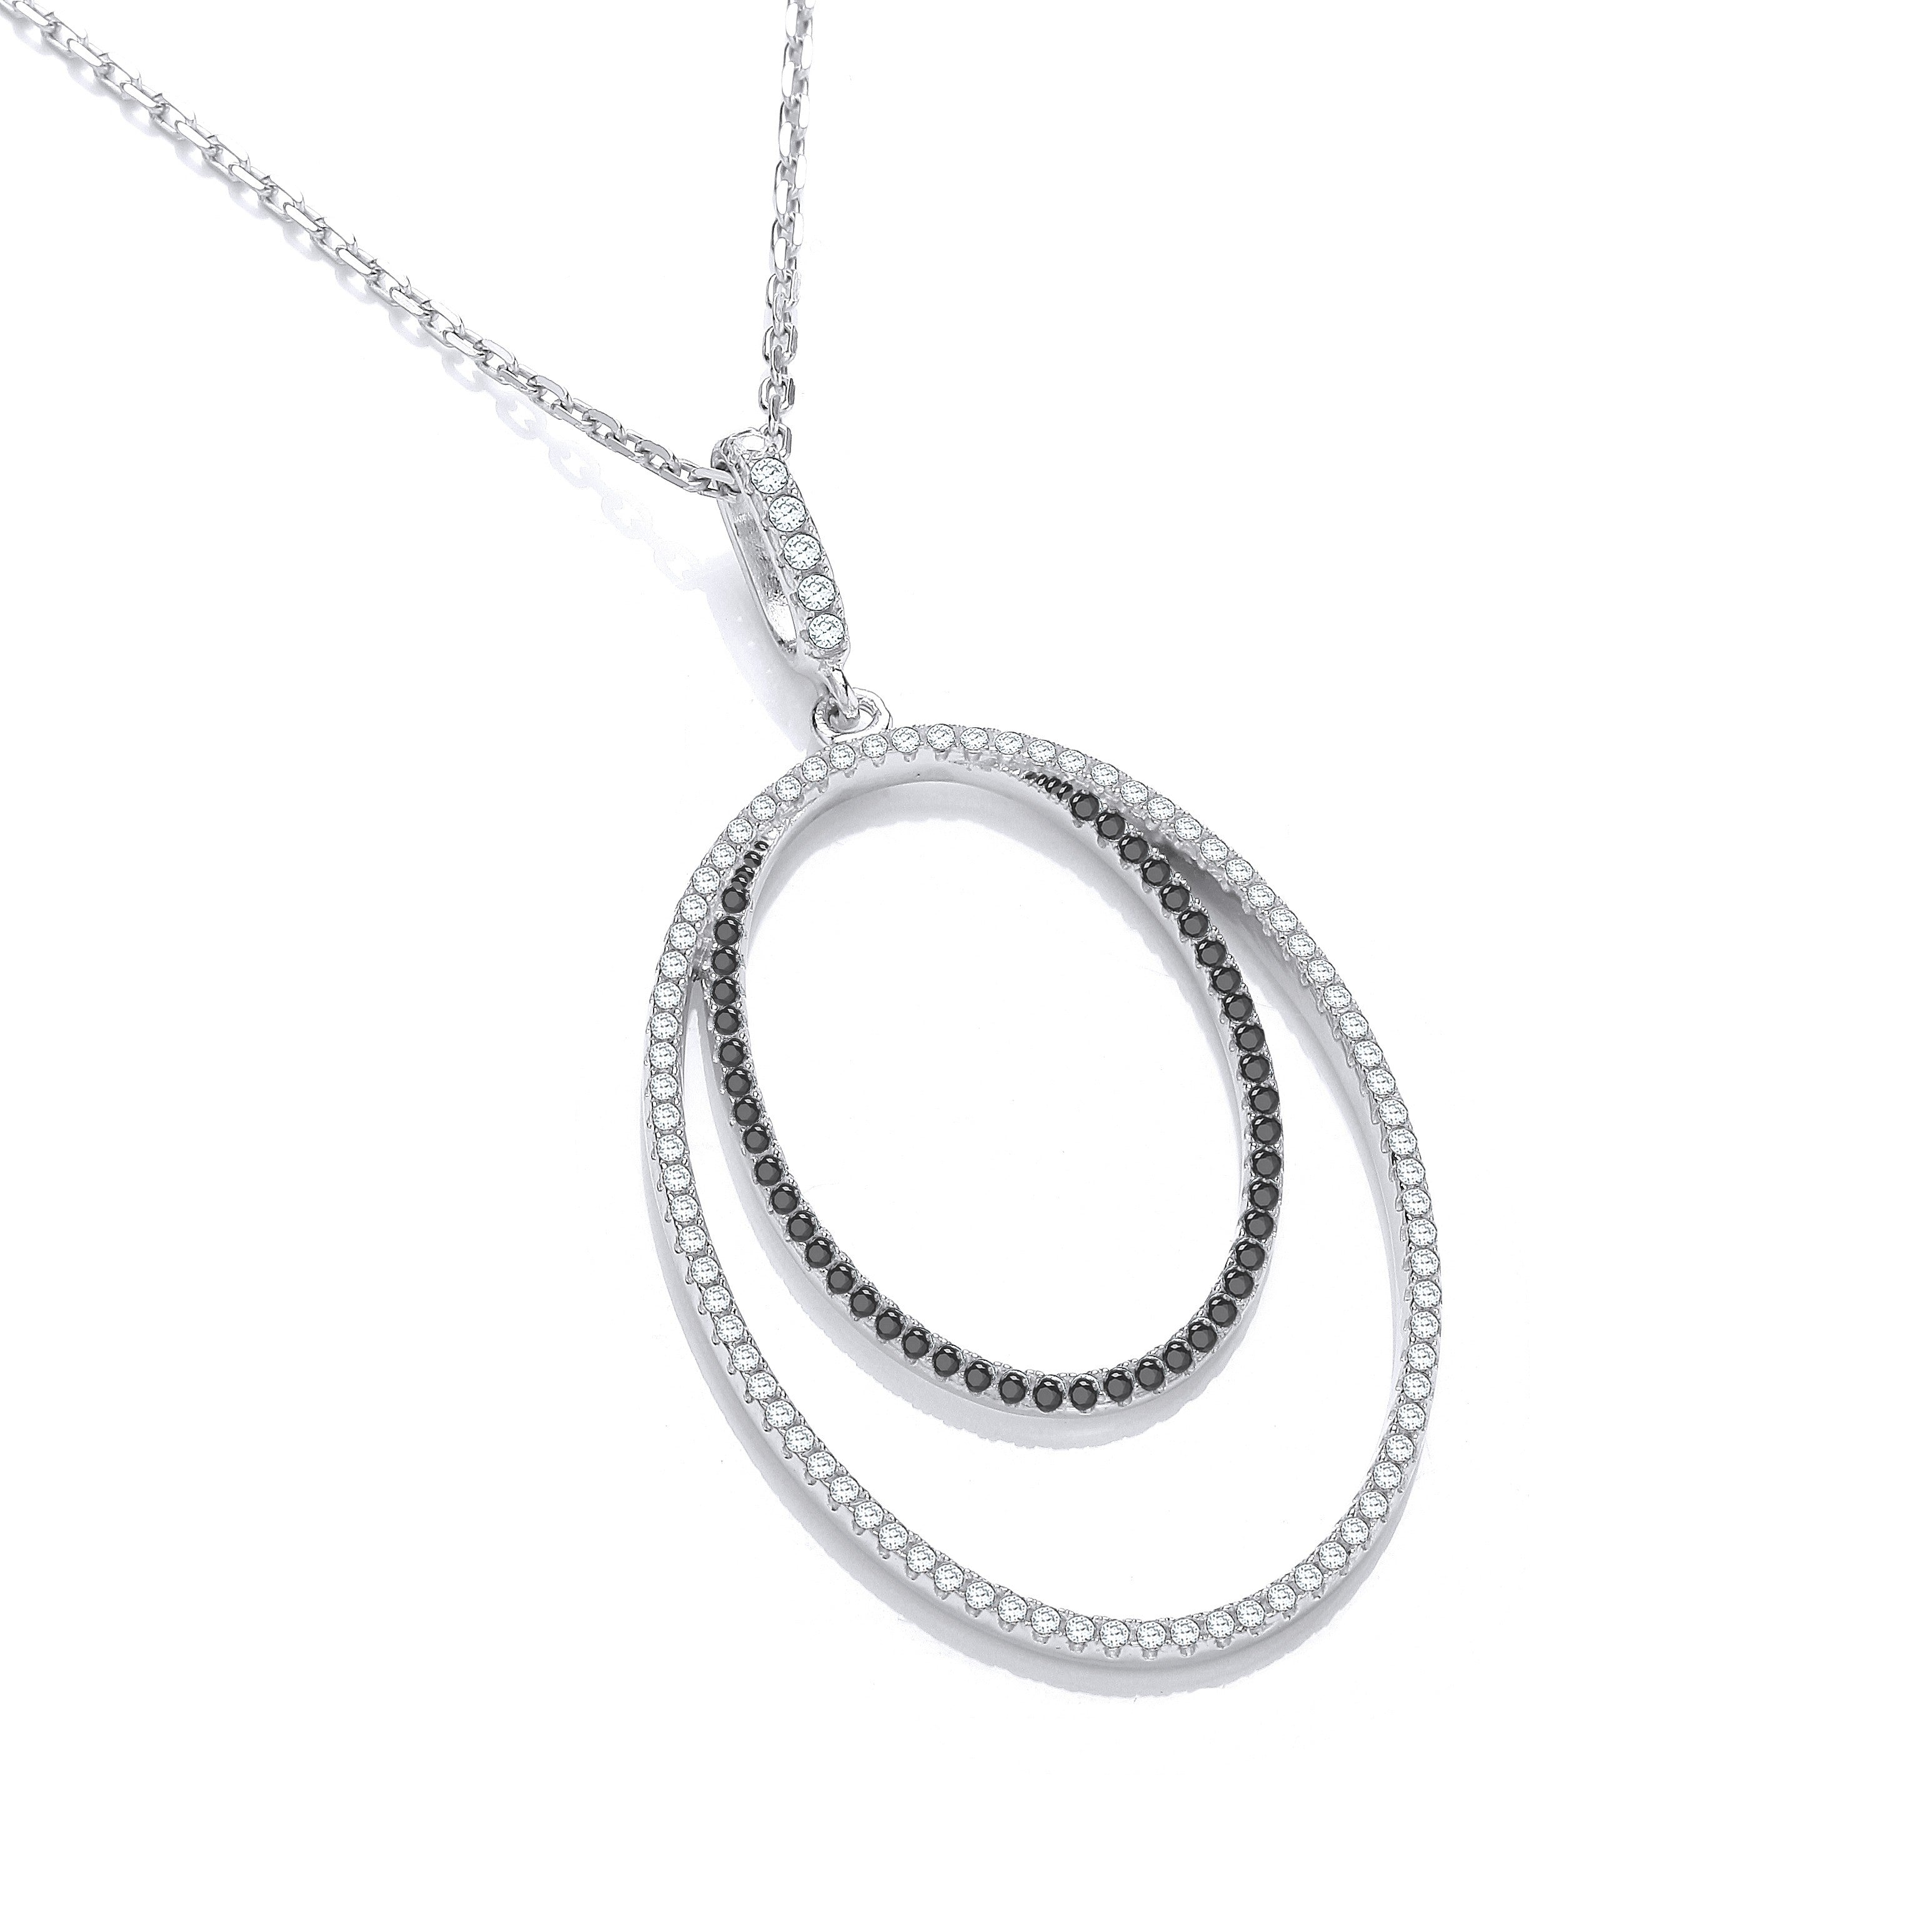 Micro Pave' Oval Double Row Cubic Zirconia Pendant with 18" Chain